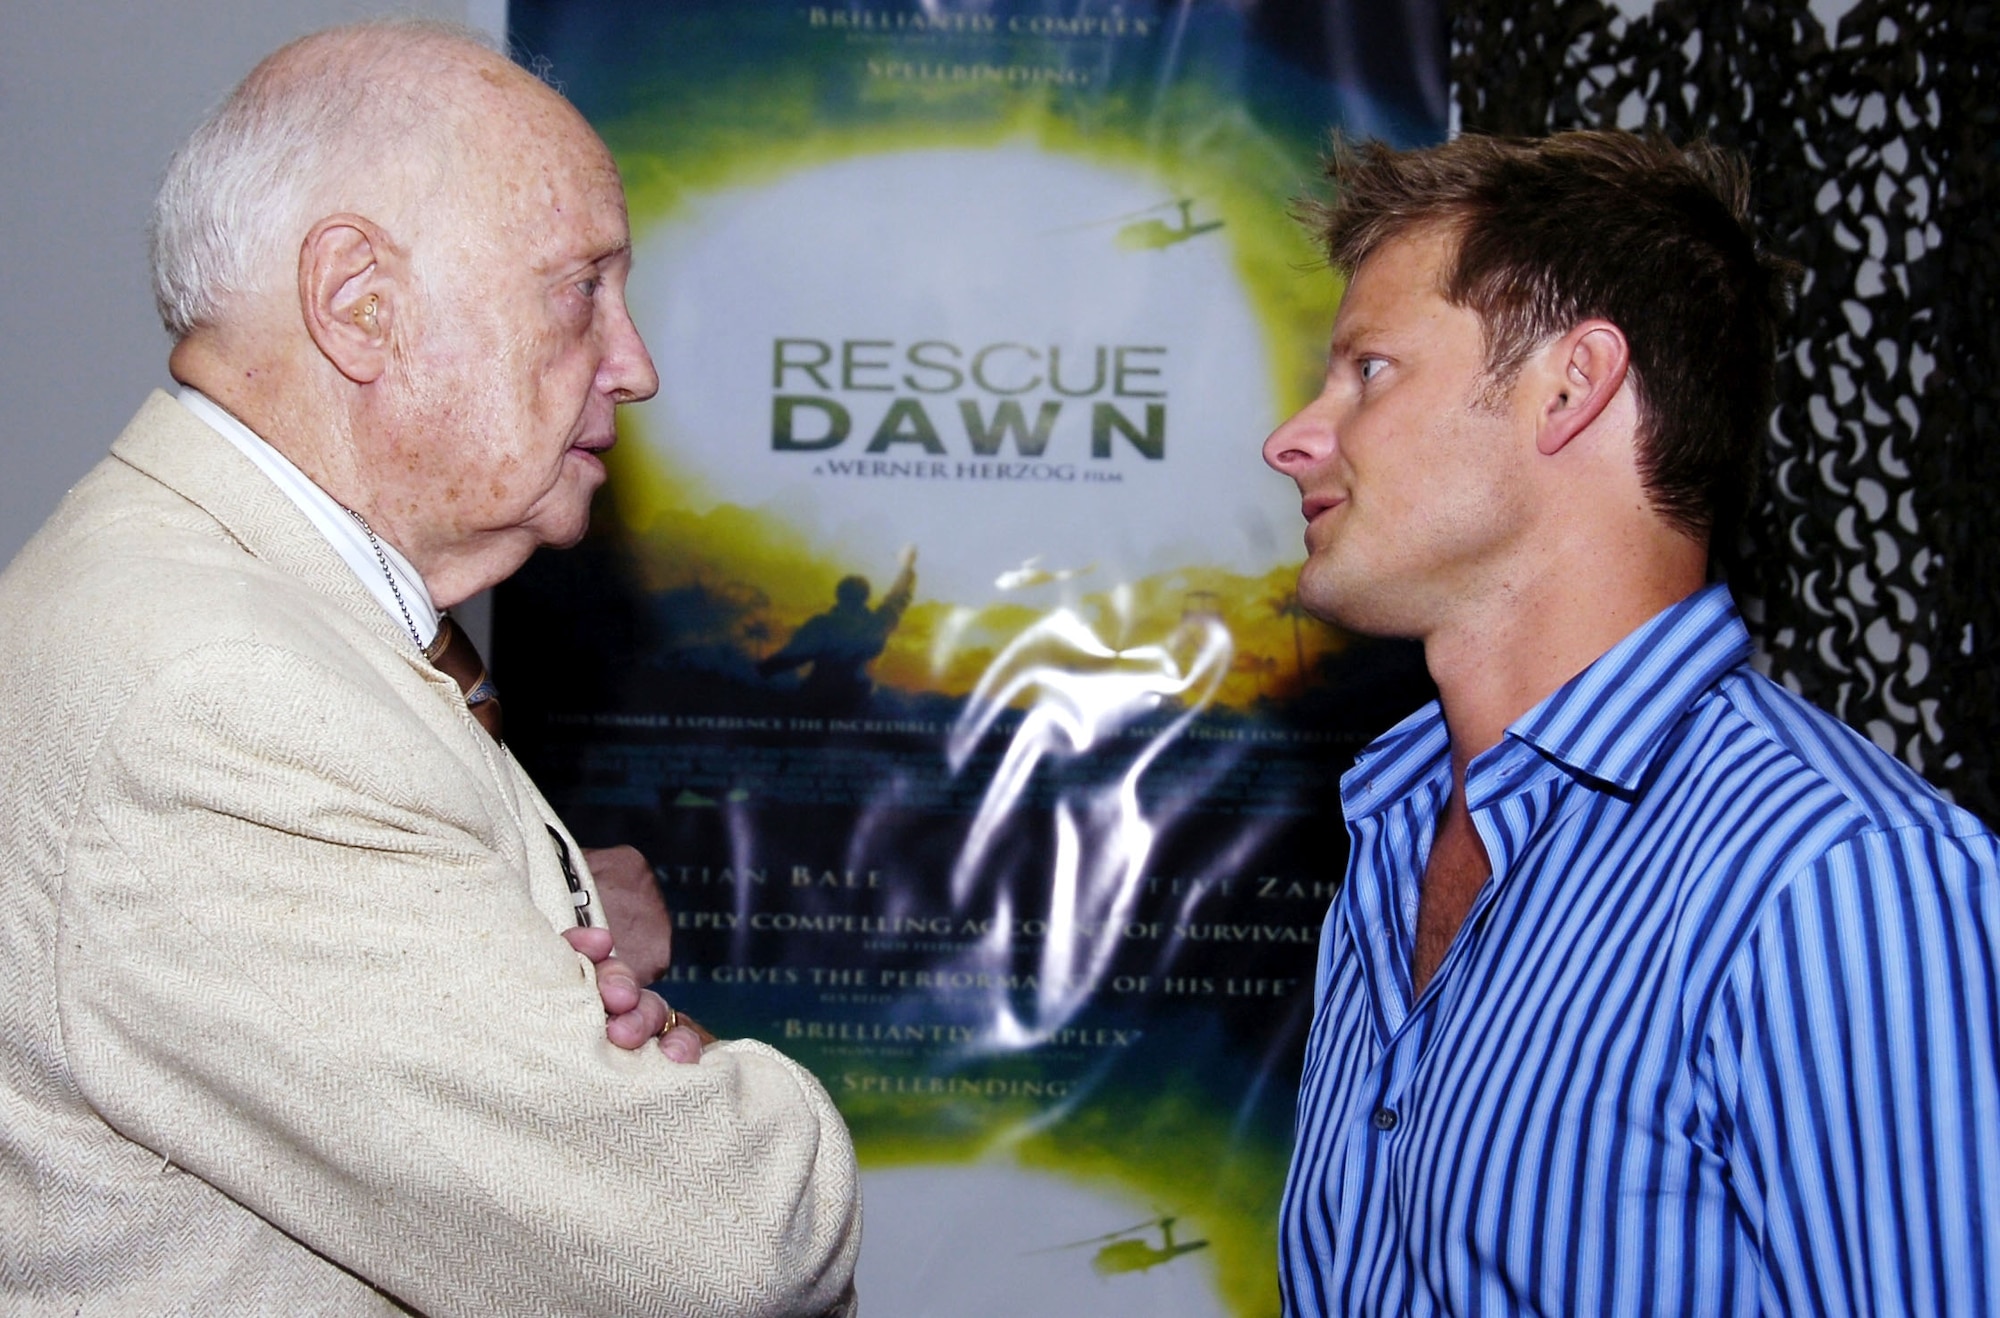 Retired Air Force Col. Eugene Deatrick, left, who rescued Navy Lt. Dieter Dengler, a POW during the Vietnam War, chats with Steve Zahn, who plays Air Force 1st Lt. Duane Martin in the movie "Rescue Dawn. The movie is about Lieutenant Dengler's capture and escape. Colonel Deatrick and Mr. Zahn met during a June 18 premiere at Andrews Air Force Base, Md. "Rescue Dawn will be out in theaters in New York and Los Angeles July 4, then go nationwide July 13. (U.S. Air Force photo/Bobby Jones)